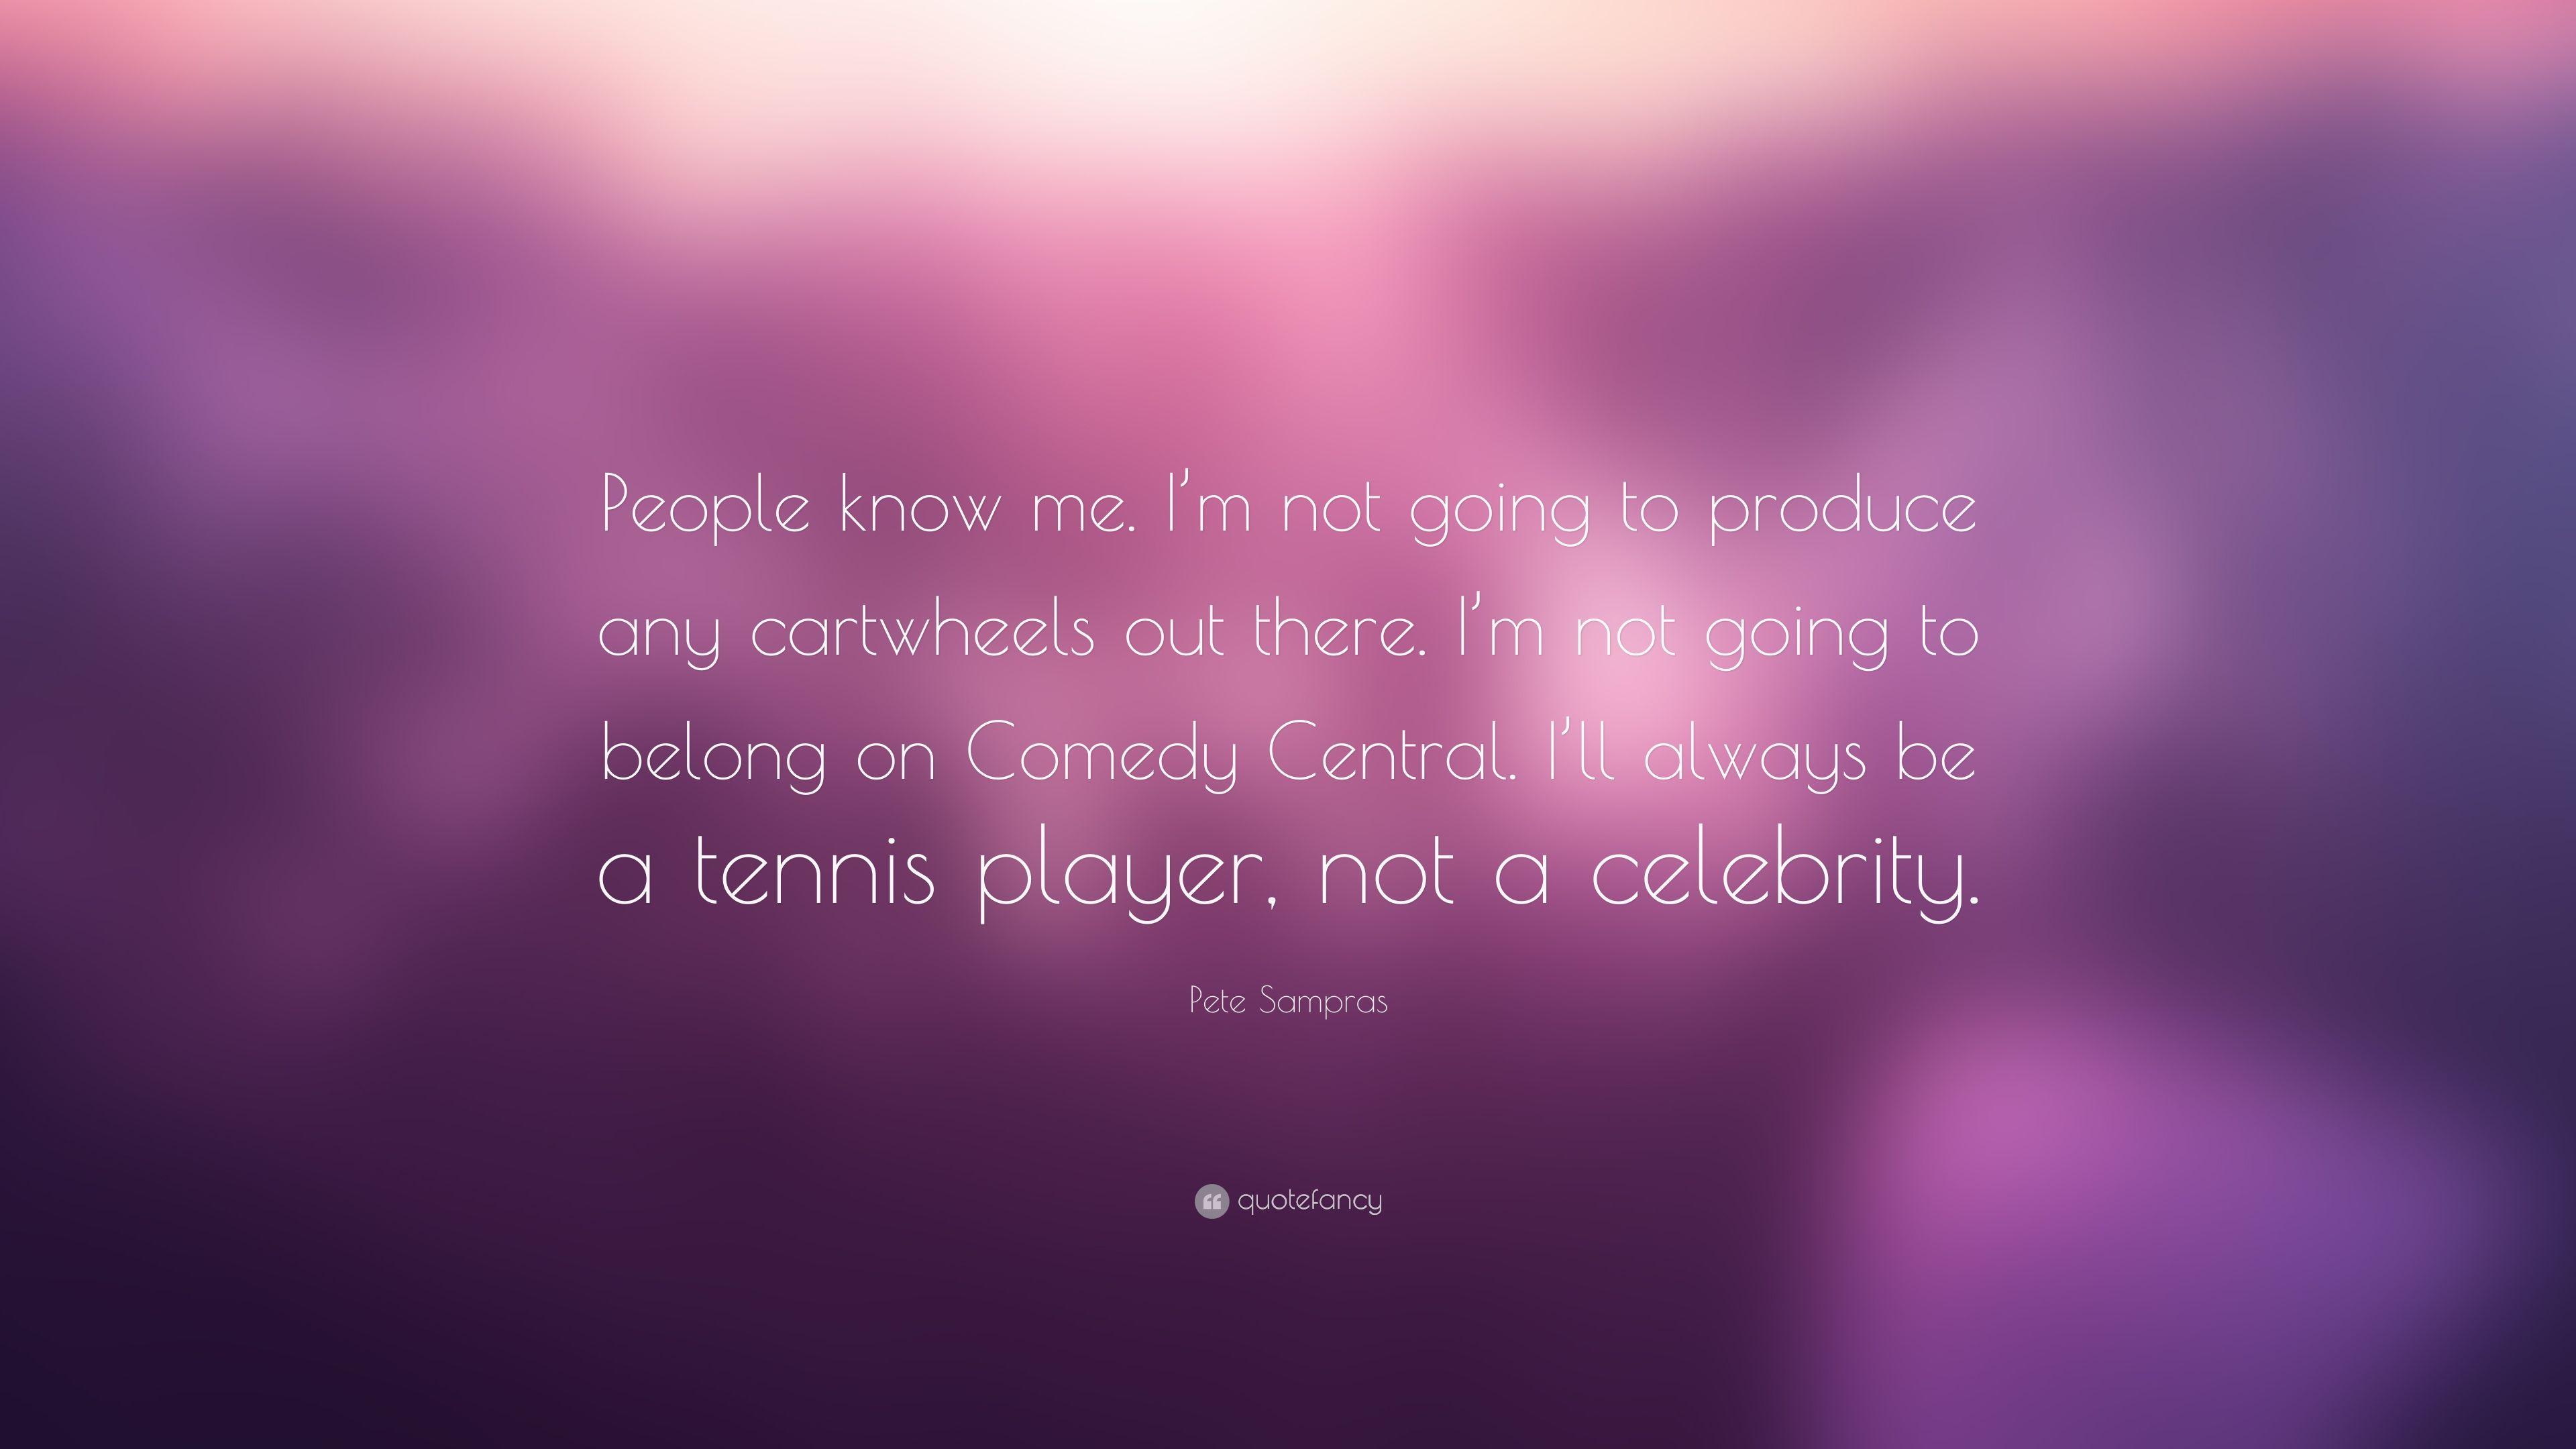 Pete Sampras Quote: “People know me. I'm not going to produce any